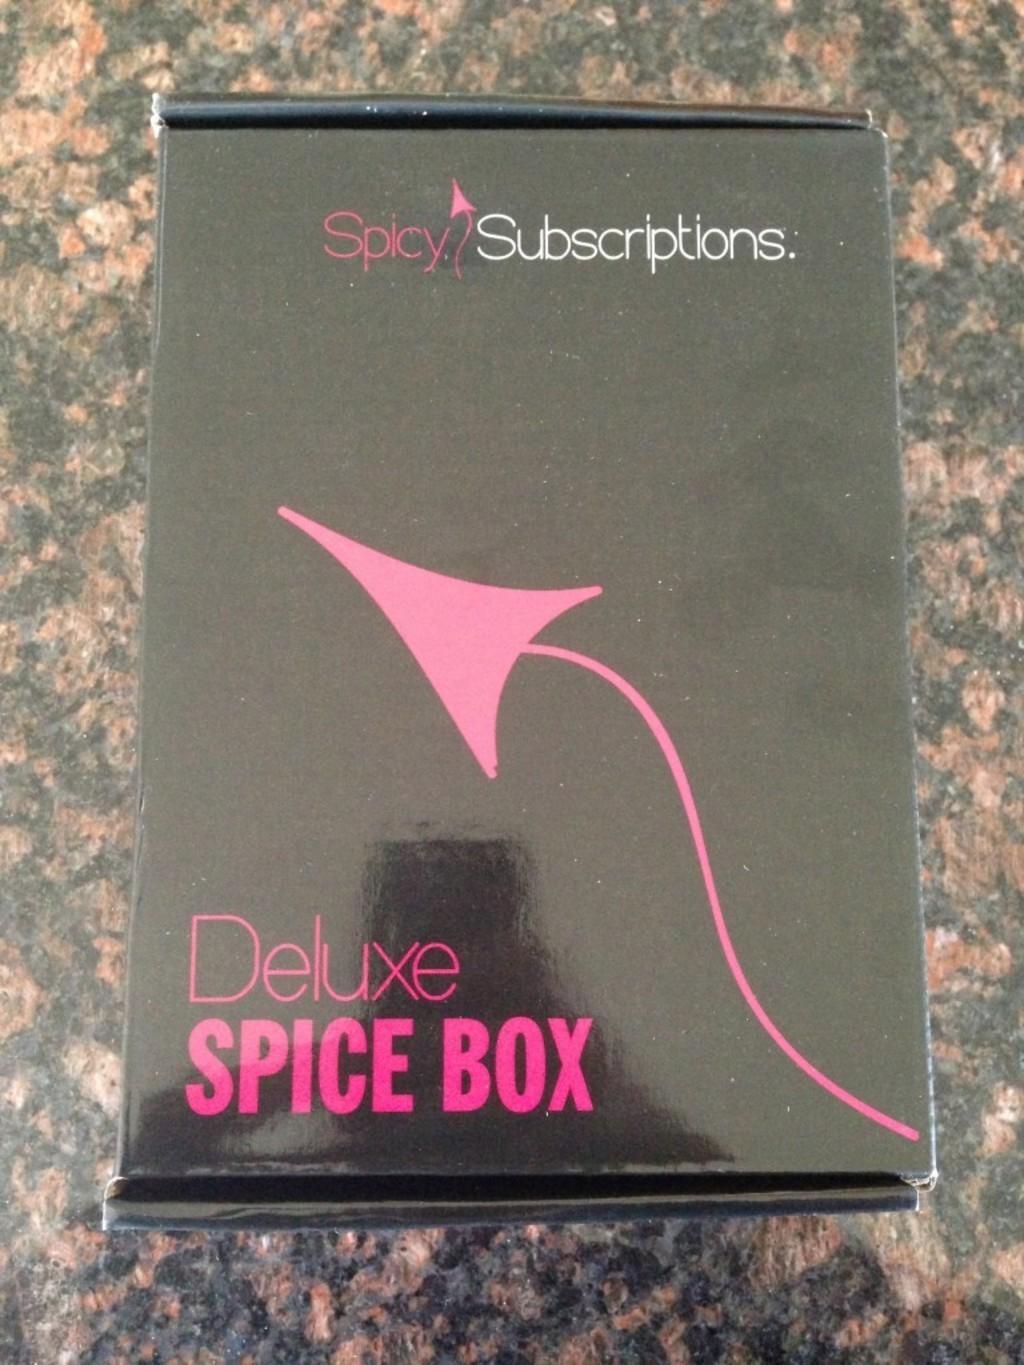 Spicy Subscriptions July Deluxe Spice Box